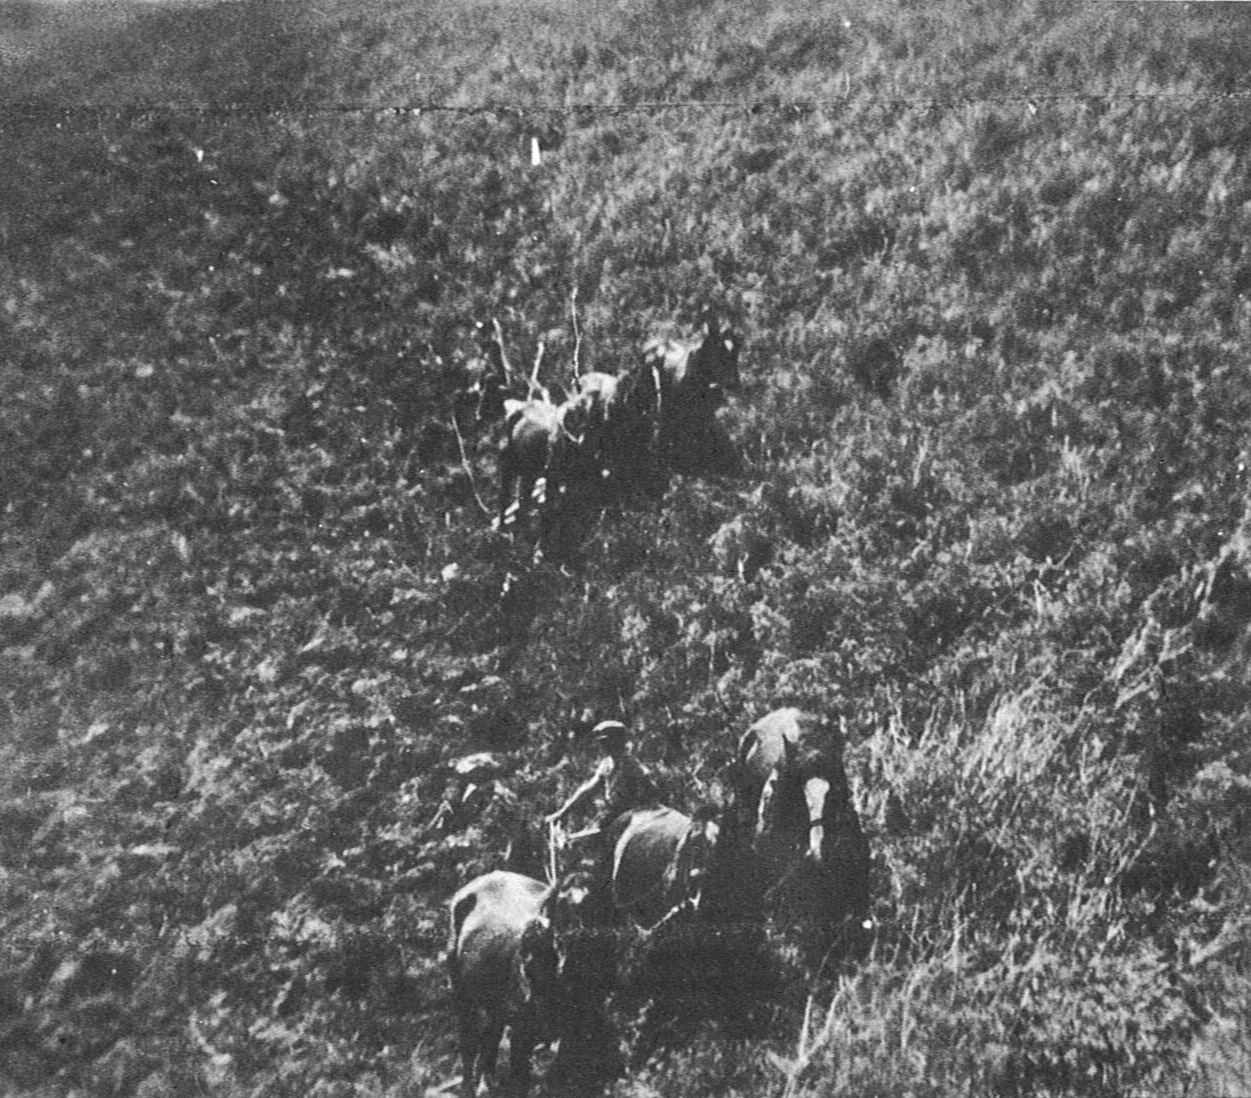 Ploughing Chitty's Hill, 1920's.